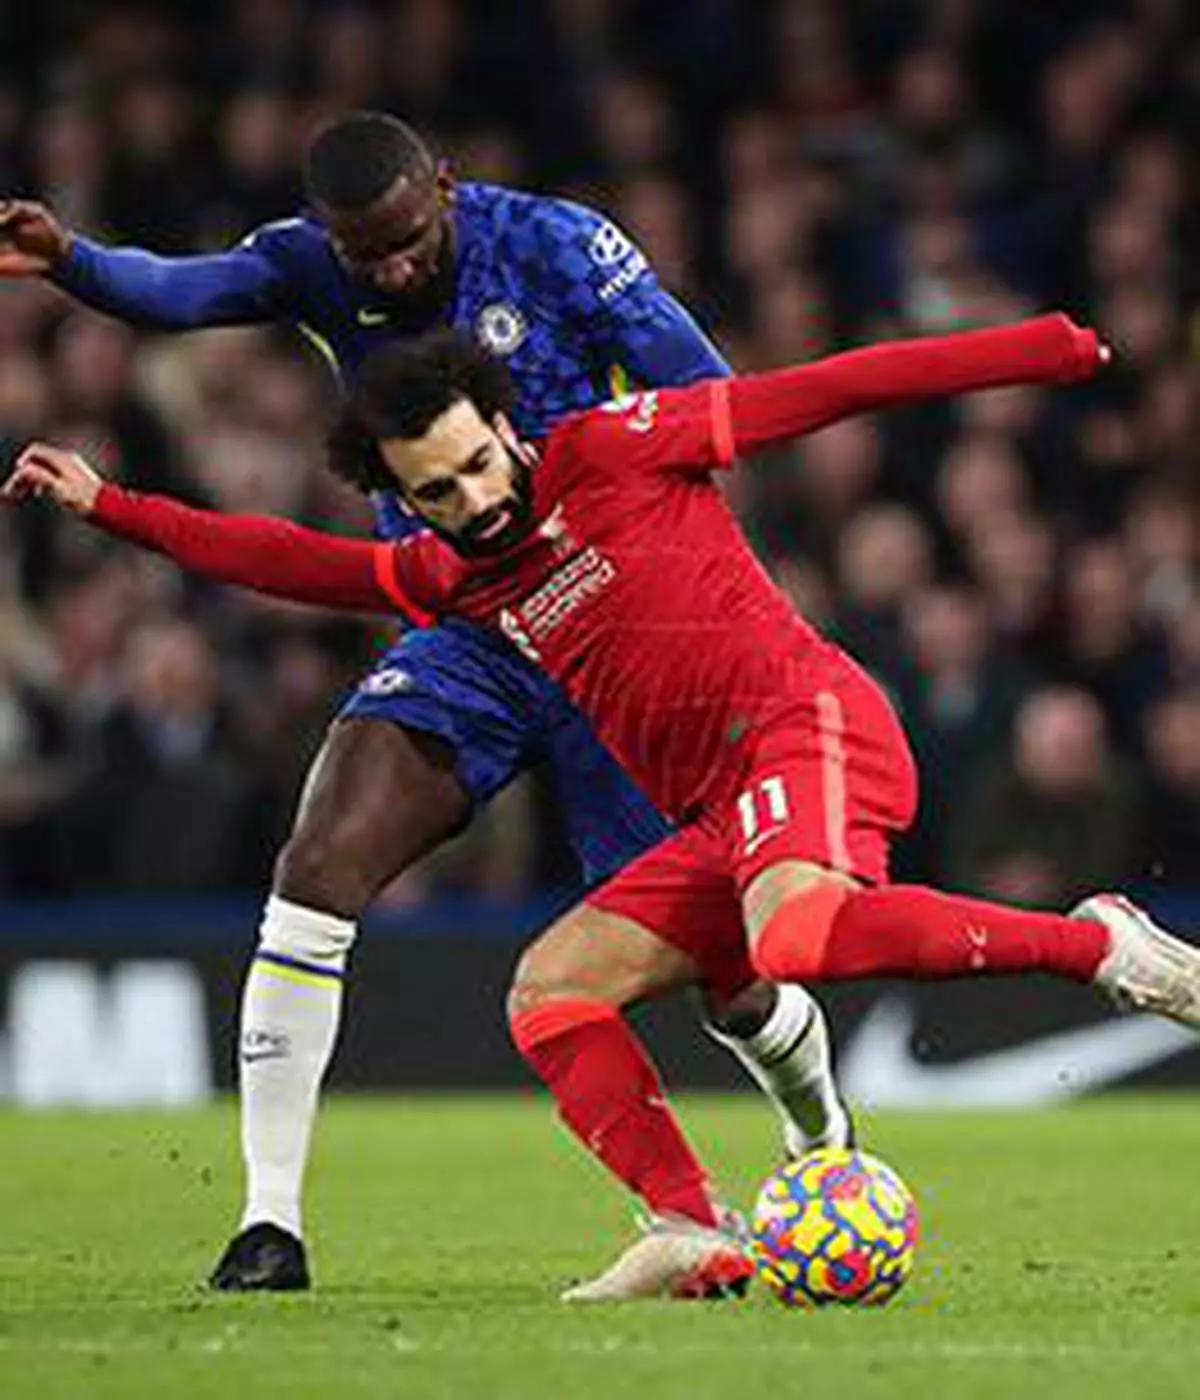 Soccer Football - Premier League - Chelsea v Liverpool - Stamford Bridge, London, Britain - January 2, 2022 Liverpool's Mohamed Salah in action with Chelsea's Antonio Rudiger Action Images via Reuters/Peter Cziborra EDITORIAL USE ONLY. No use with unauthorized audio, video, data, fixture lists, club/league logos or 'live' services. Online in-match use limited to 75 images, no video emulation. No use in betting, games or single club /league/player publications. Please contact your account representative for further details.